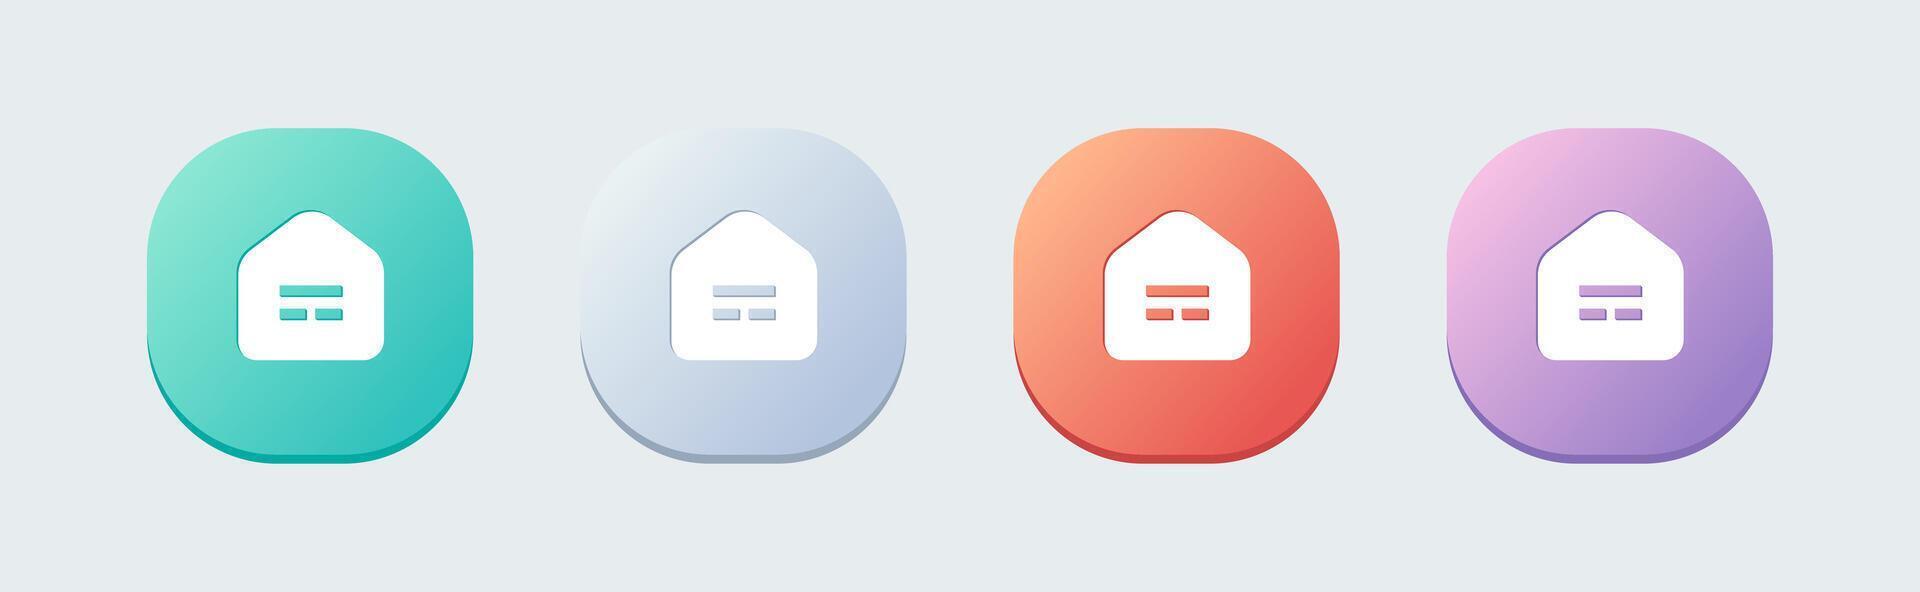 Home button solid icon in flat design style. House signs vector illustration.